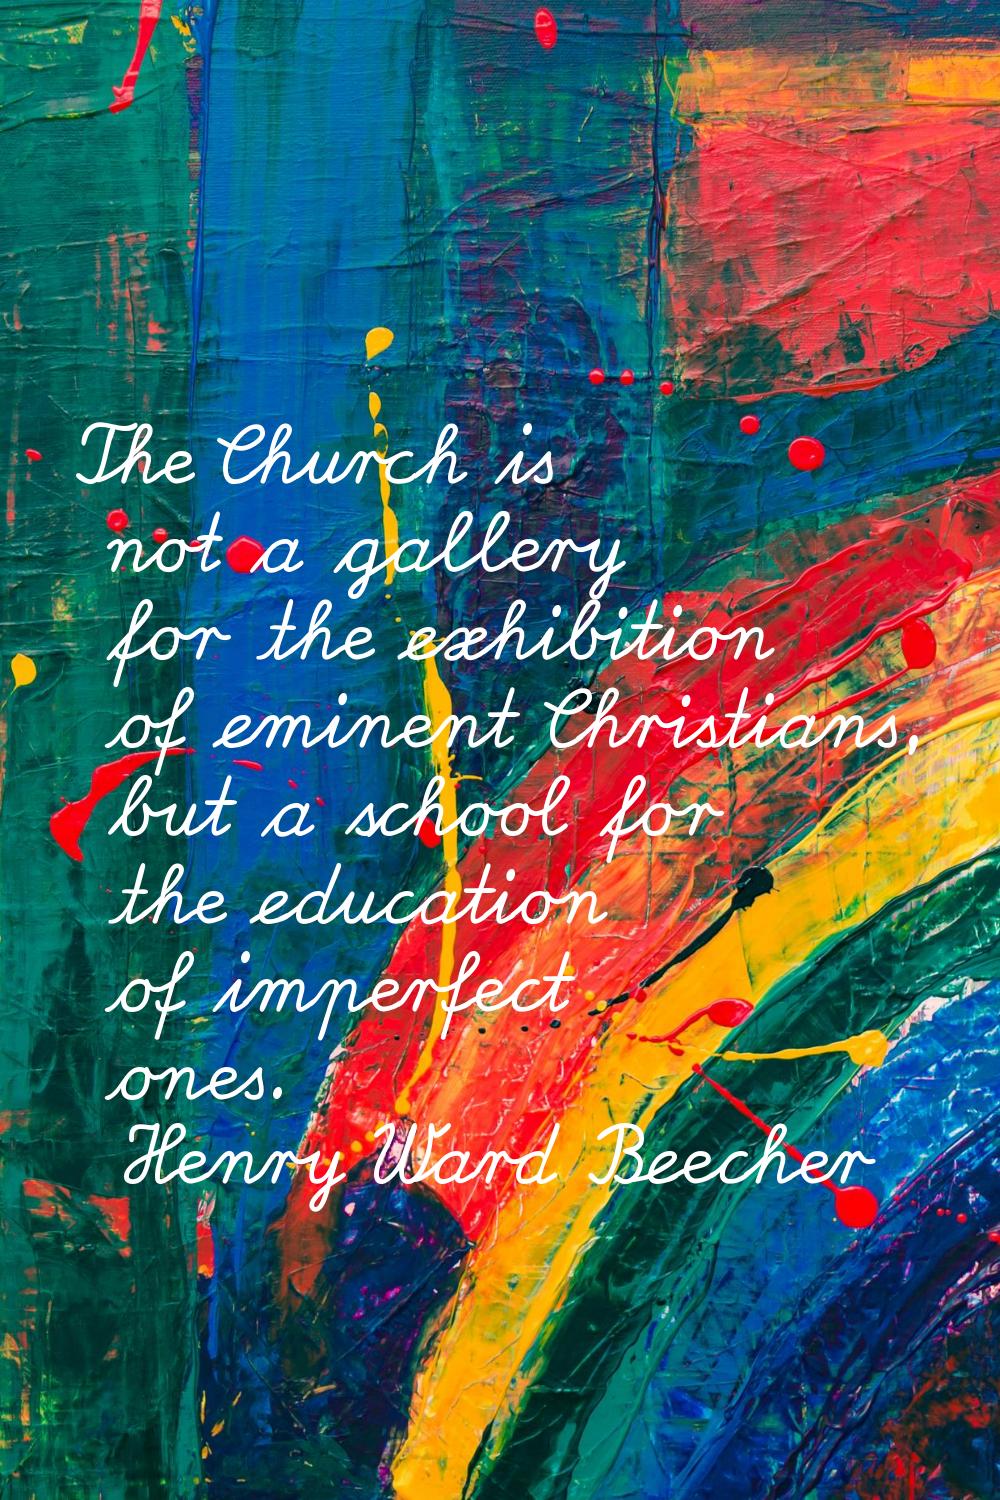 The Church is not a gallery for the exhibition of eminent Christians, but a school for the educatio